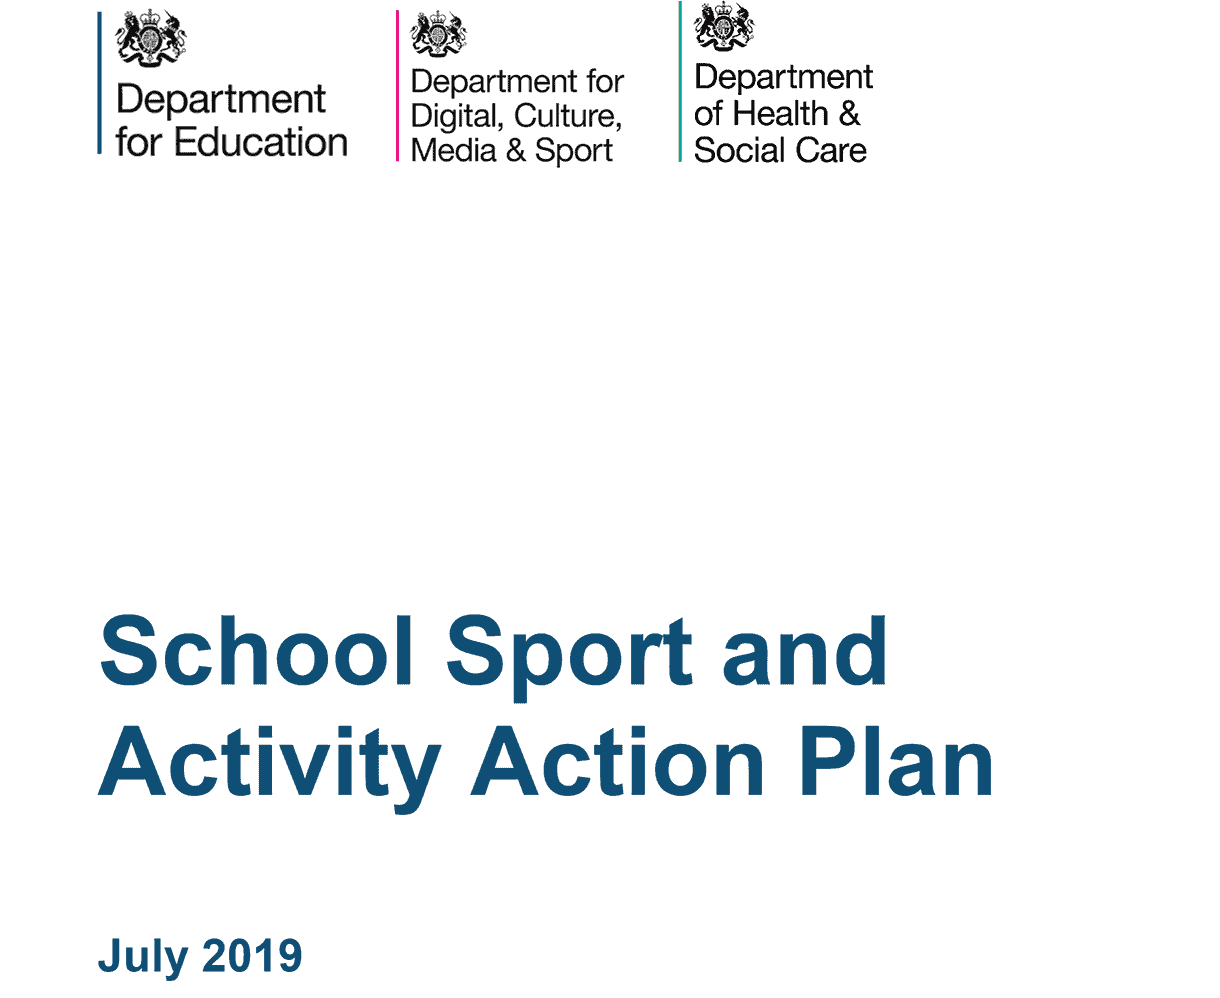 School Sport and Physical Activity Action Plan – July 2019